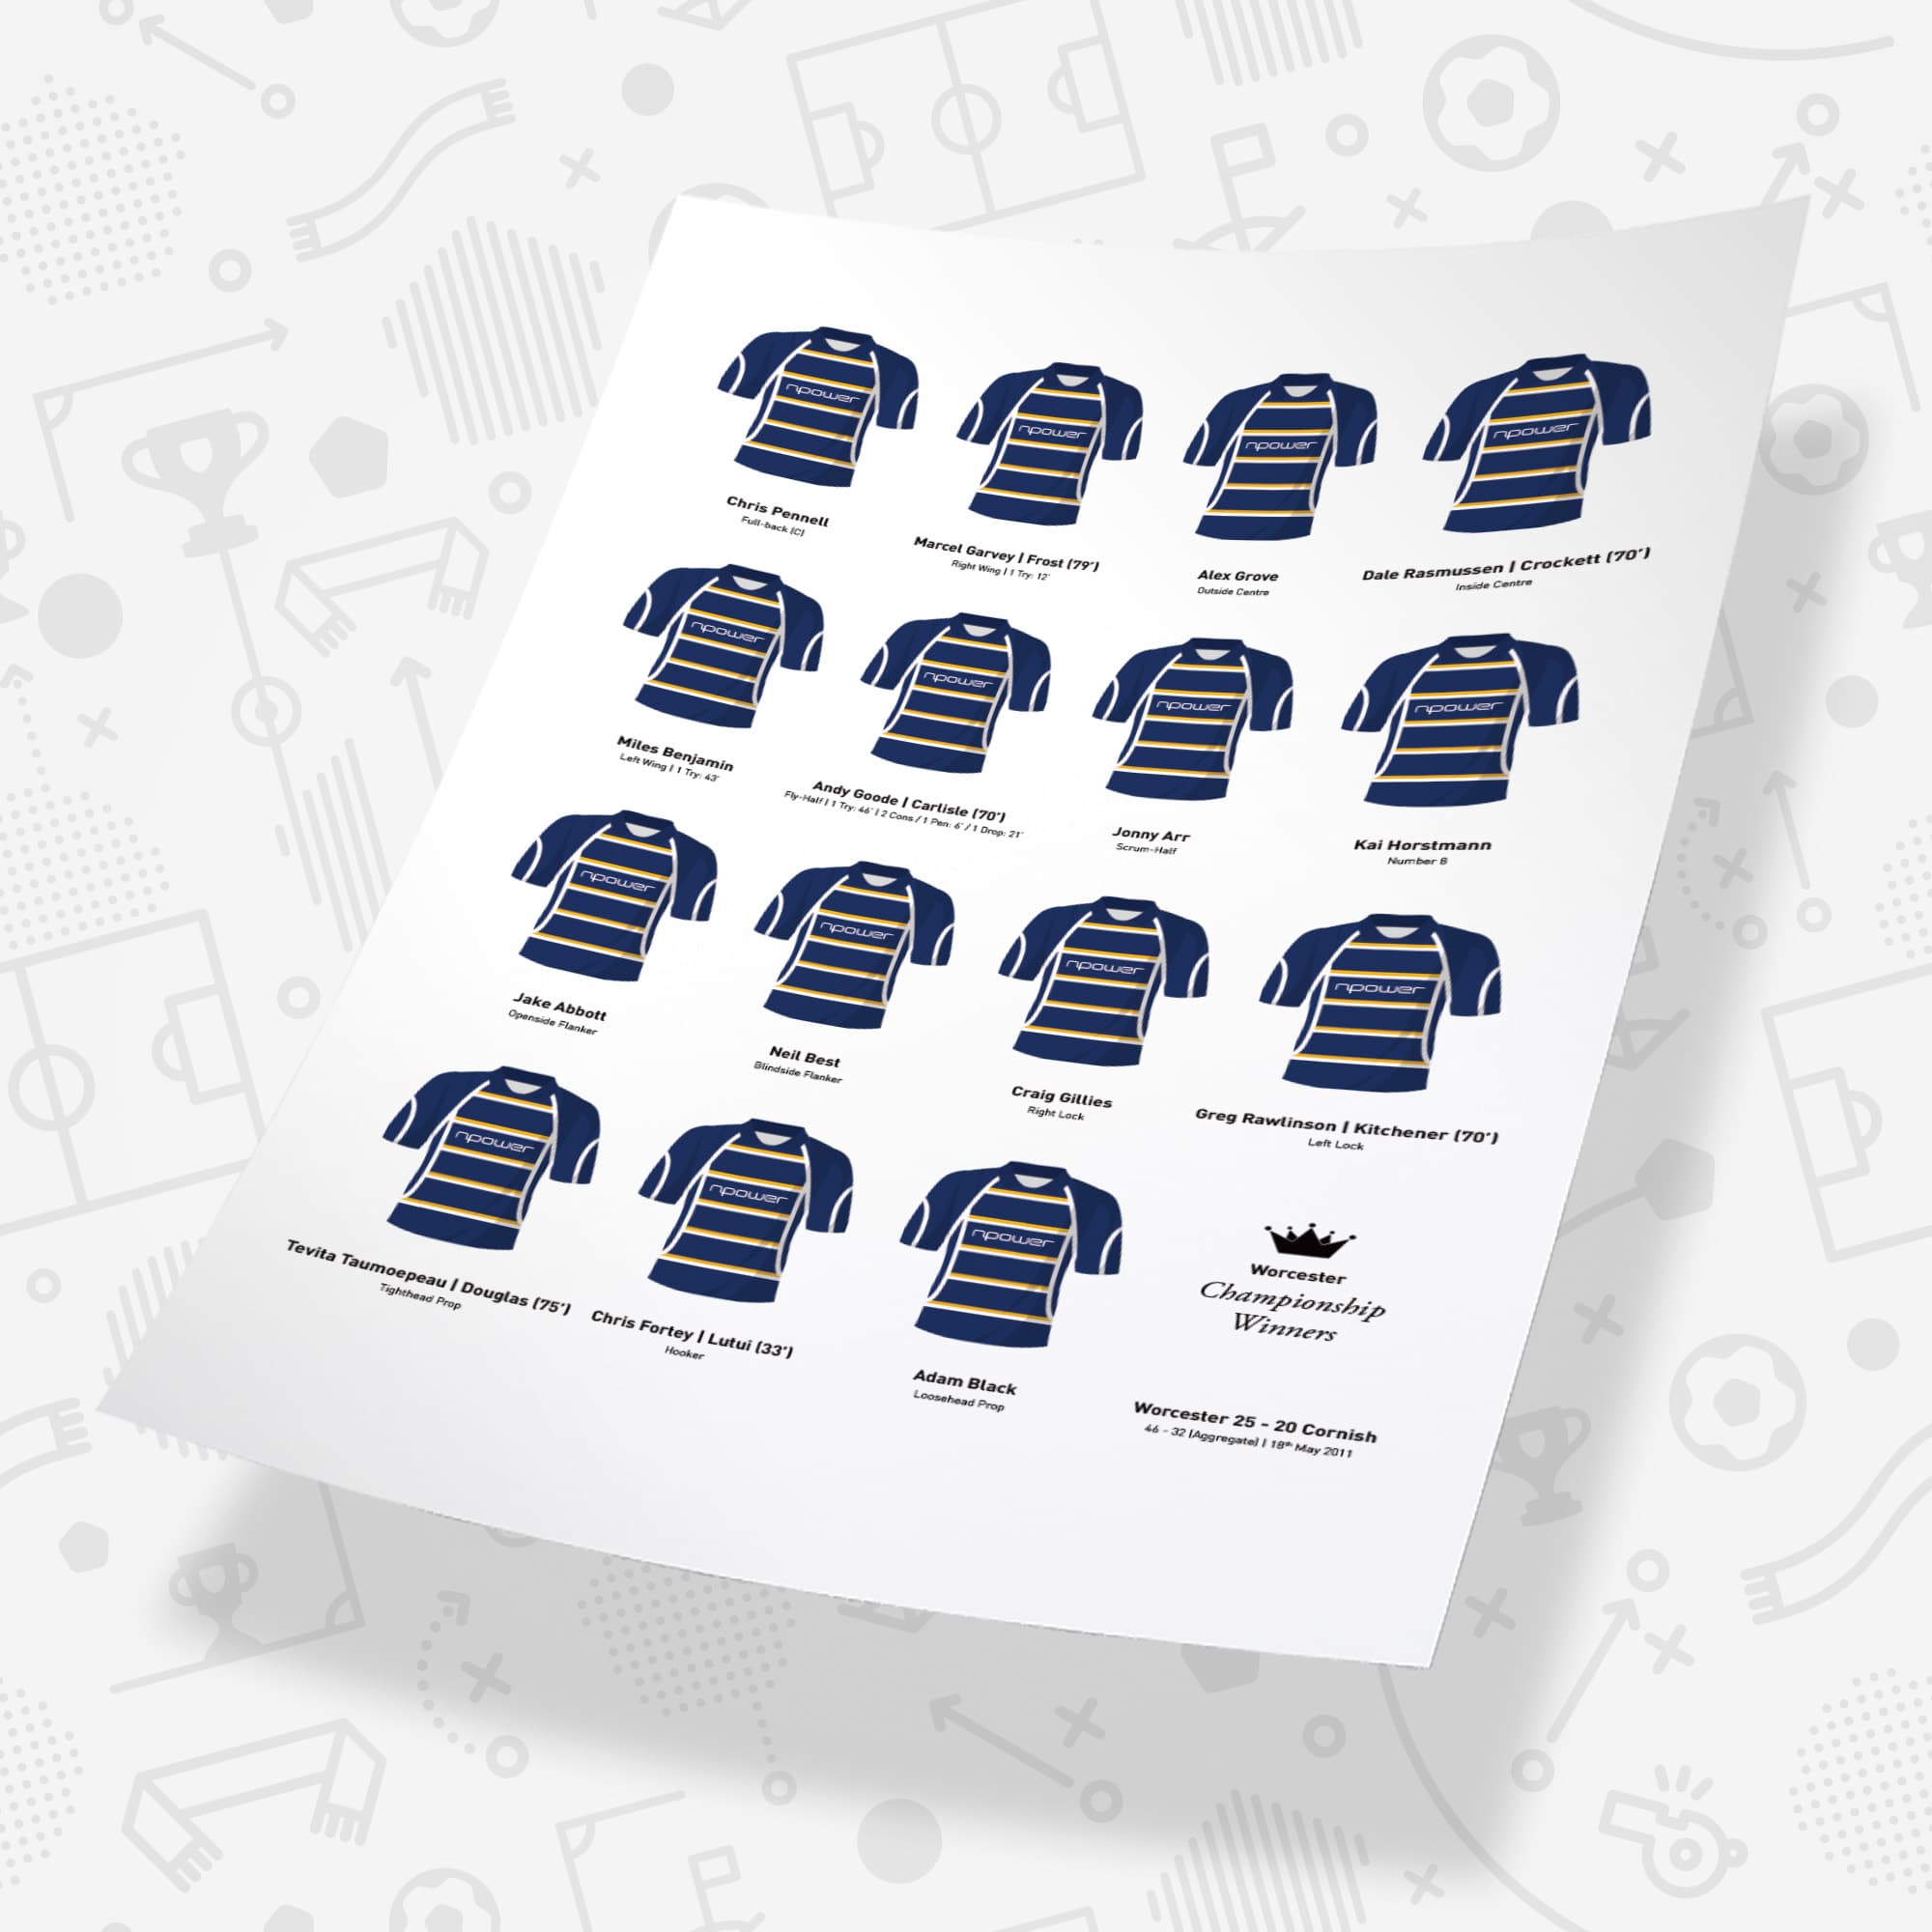 Worcester Rugby Union 2011 Championship Winners Team Print